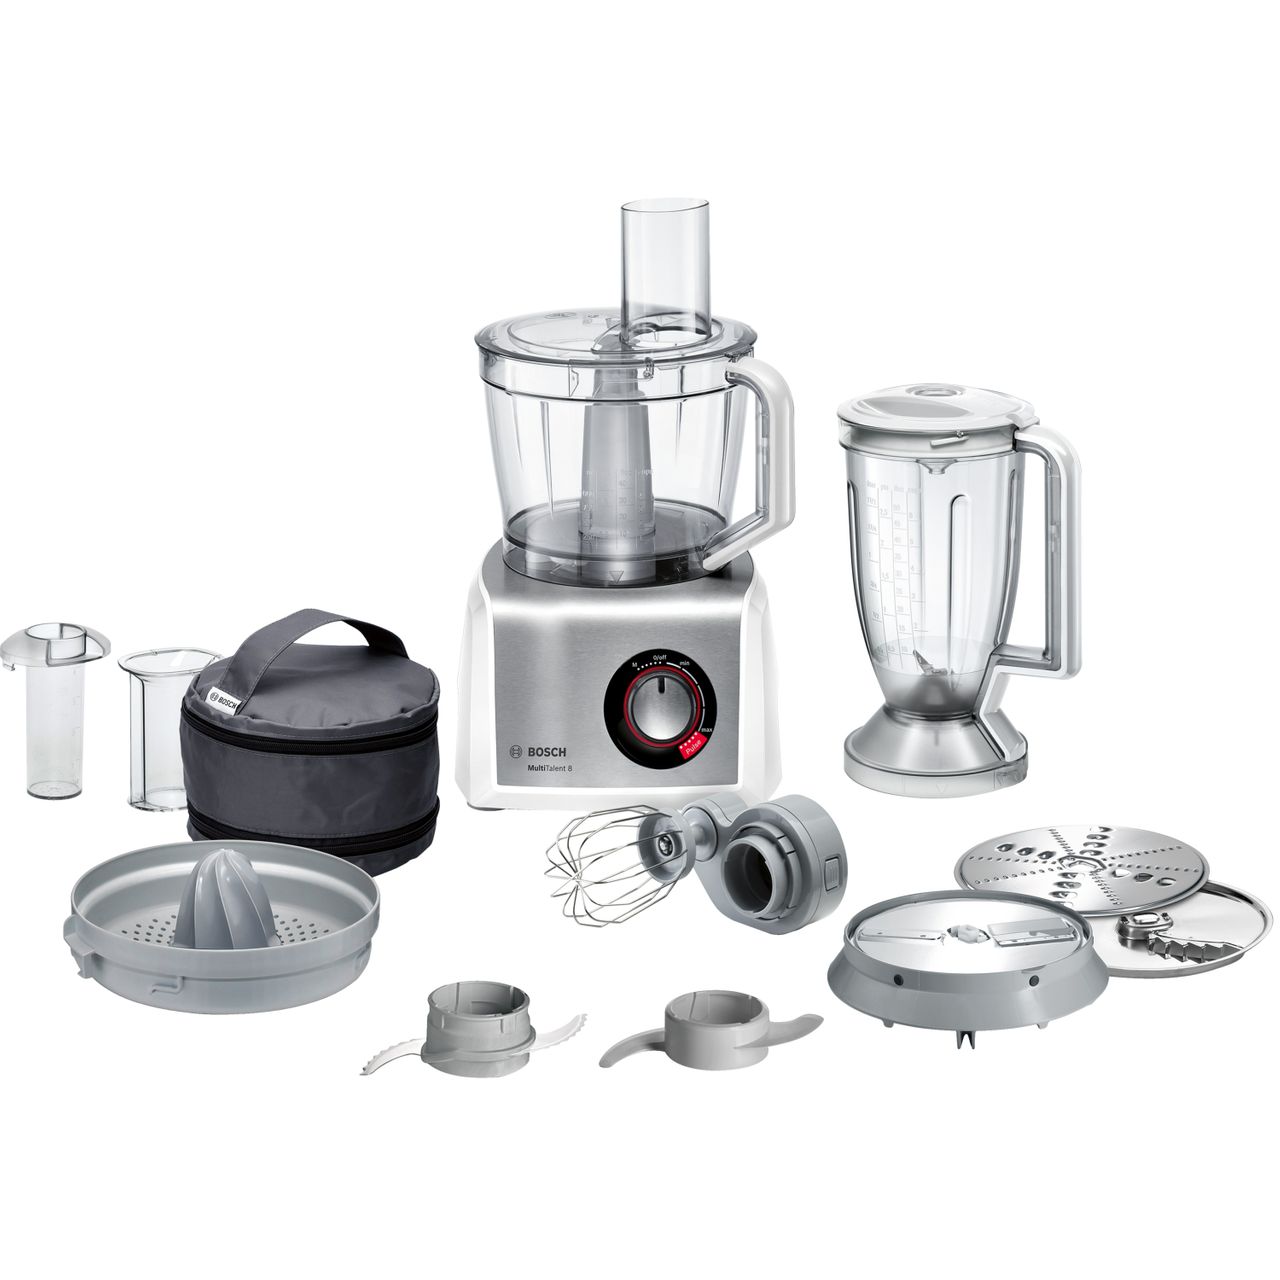 Bosch MC812S734G 3.9 Litre Food Processor With 9 Accessories Review